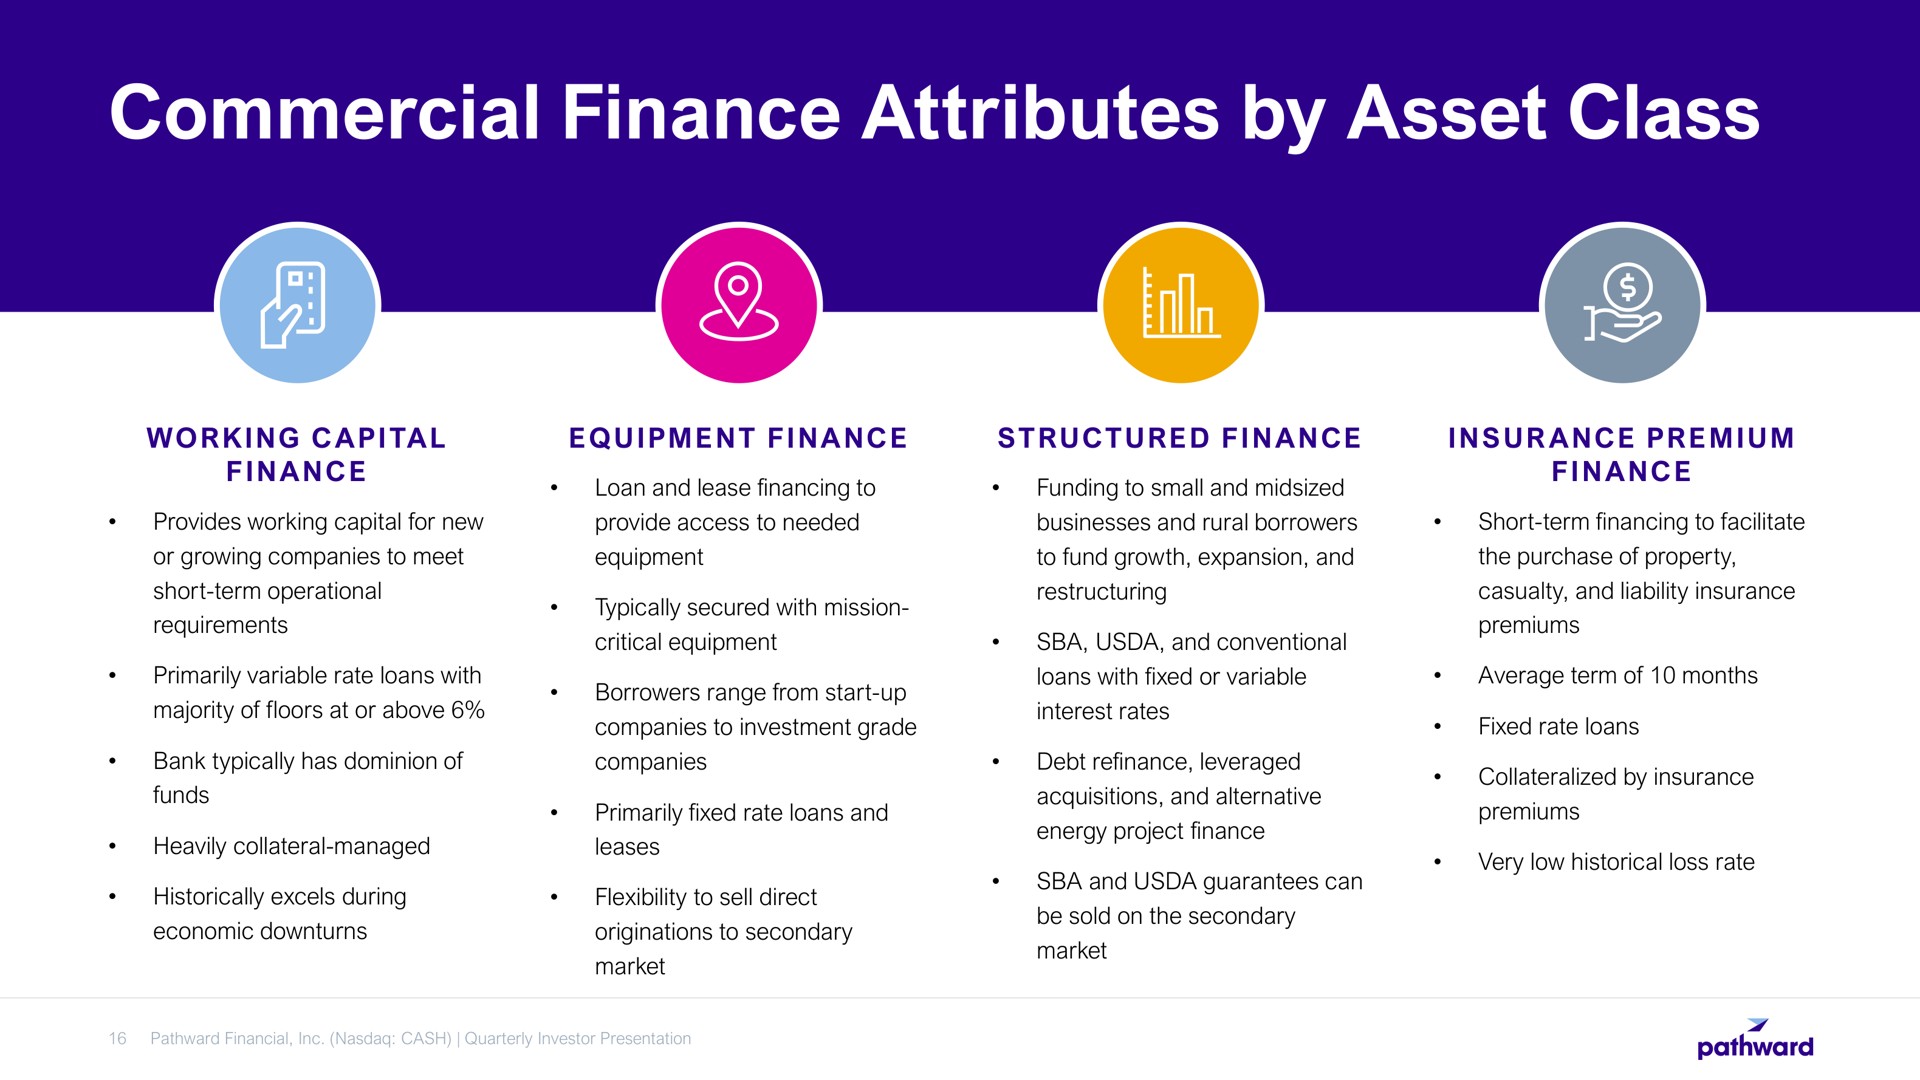 commercial finance attributes by asset class | Pathward Financial